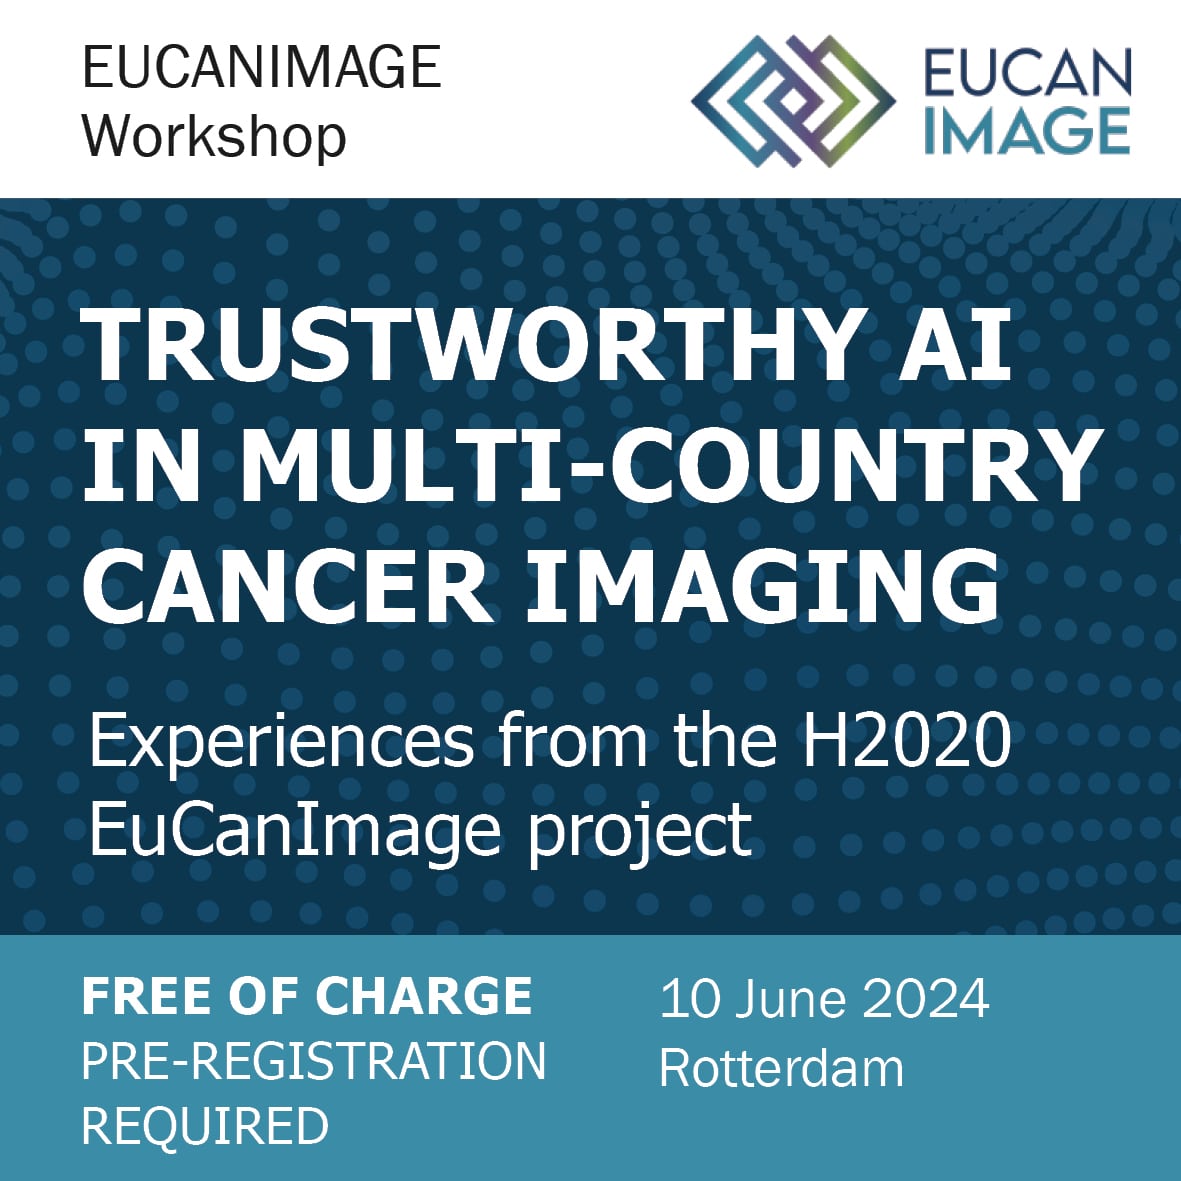 EACR-EuCanImage Workshop: Trustworthy AI in Multi-Country Cancer Imaging